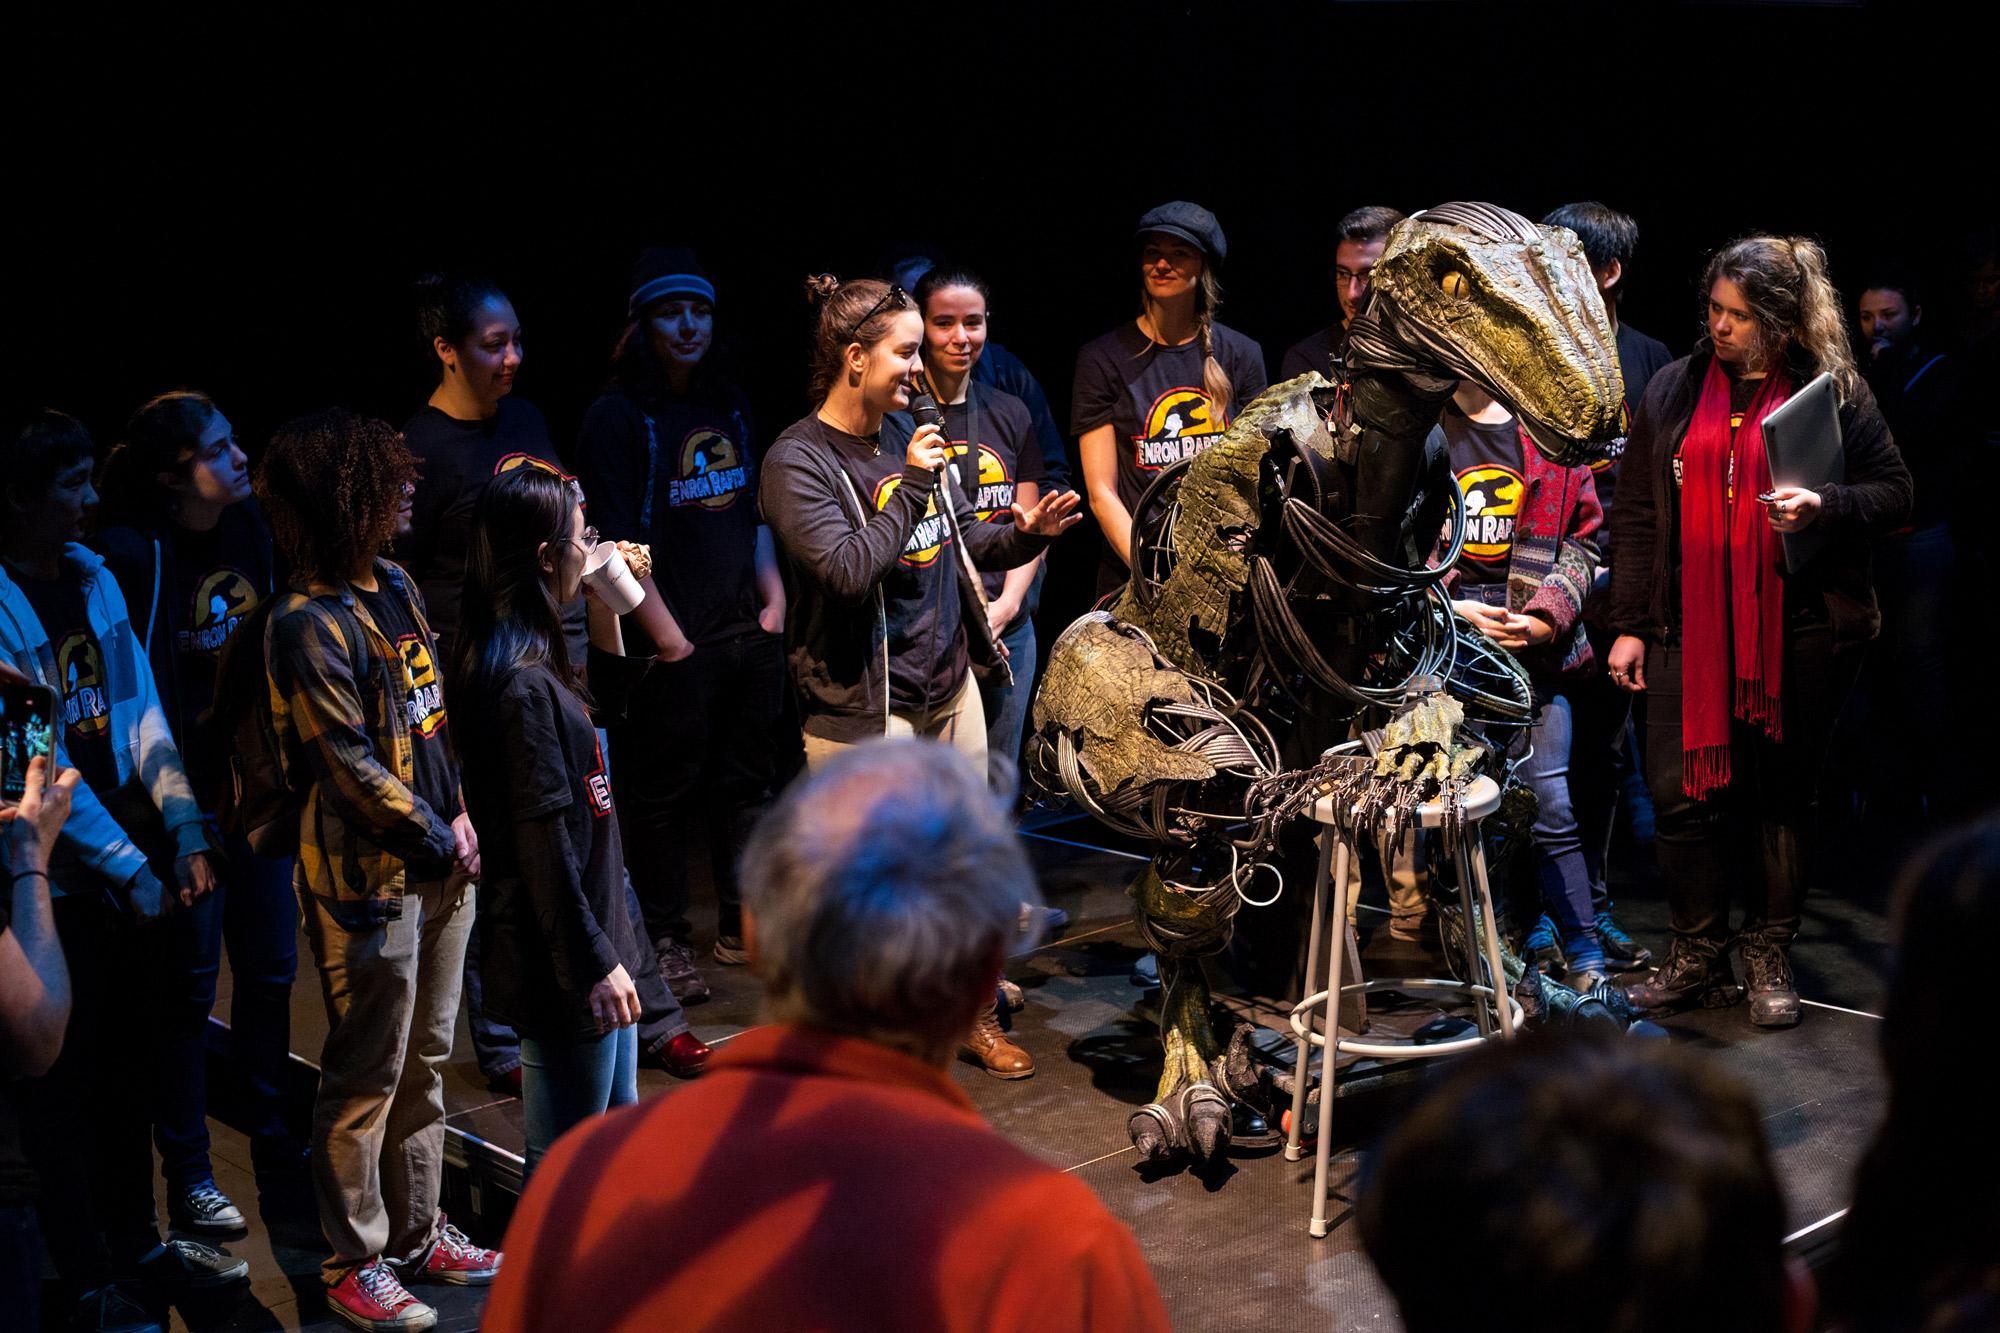 Students wearing Enron raptor tshirts at an unveiling with an animatronic raptor